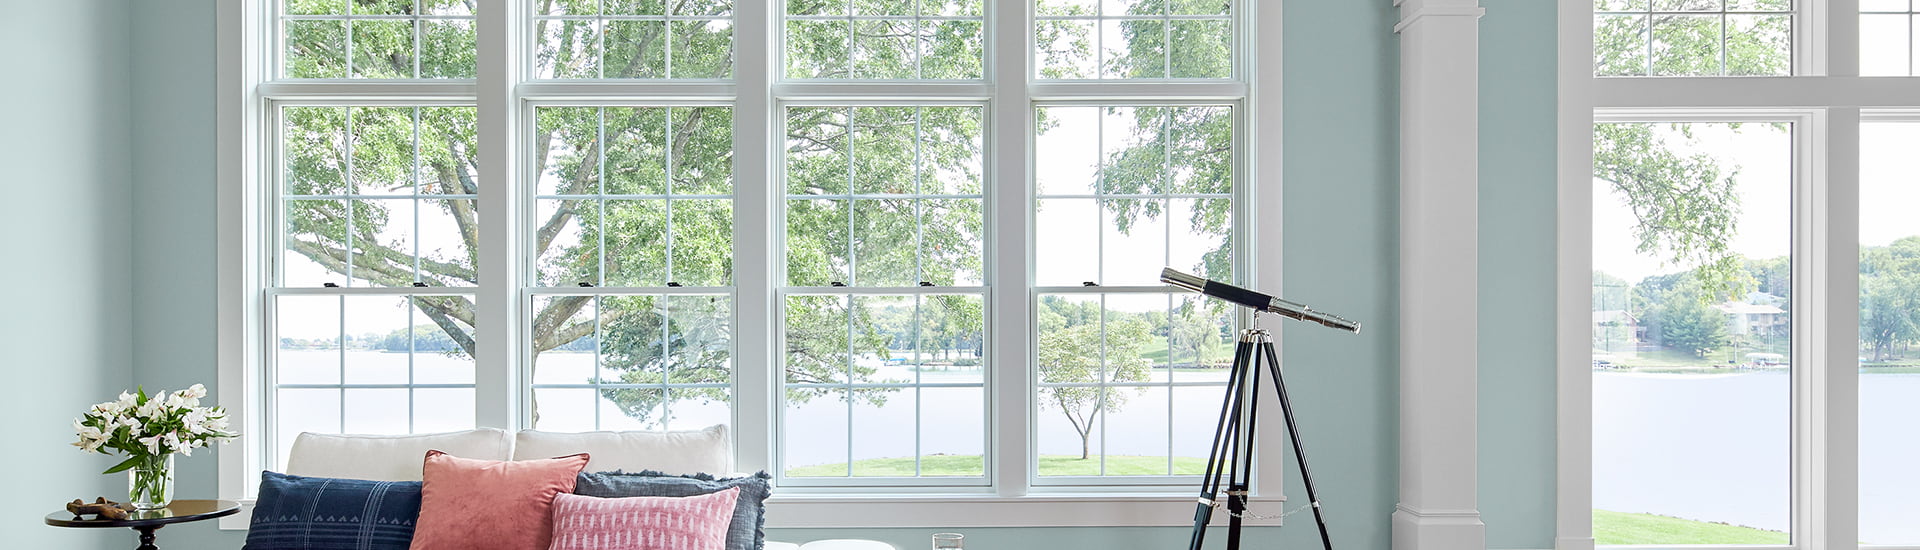 three wood double-hung windows not only bring in natural light, but also give a beautiful view of the lake